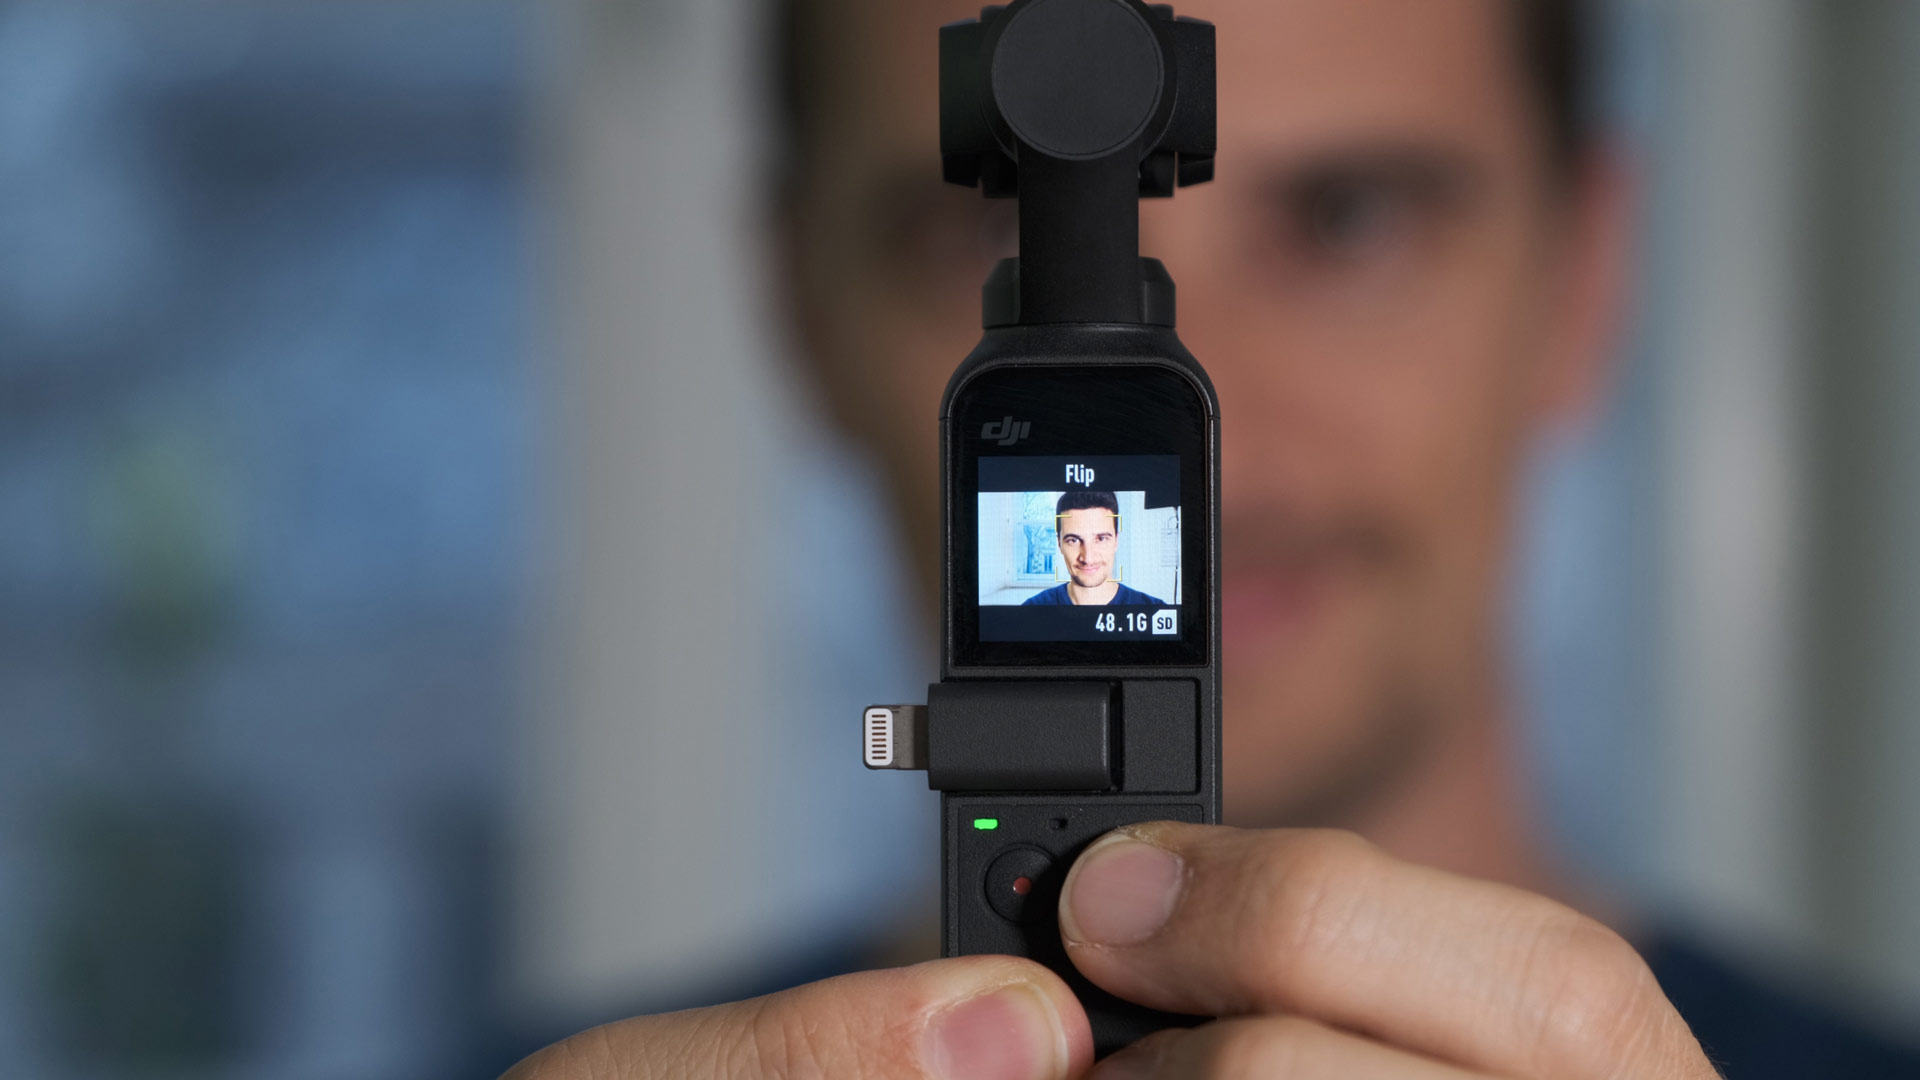 DJI Osmo Pocket Review & Hands-on - a TOOL for PROFESSIONALS? | CineD